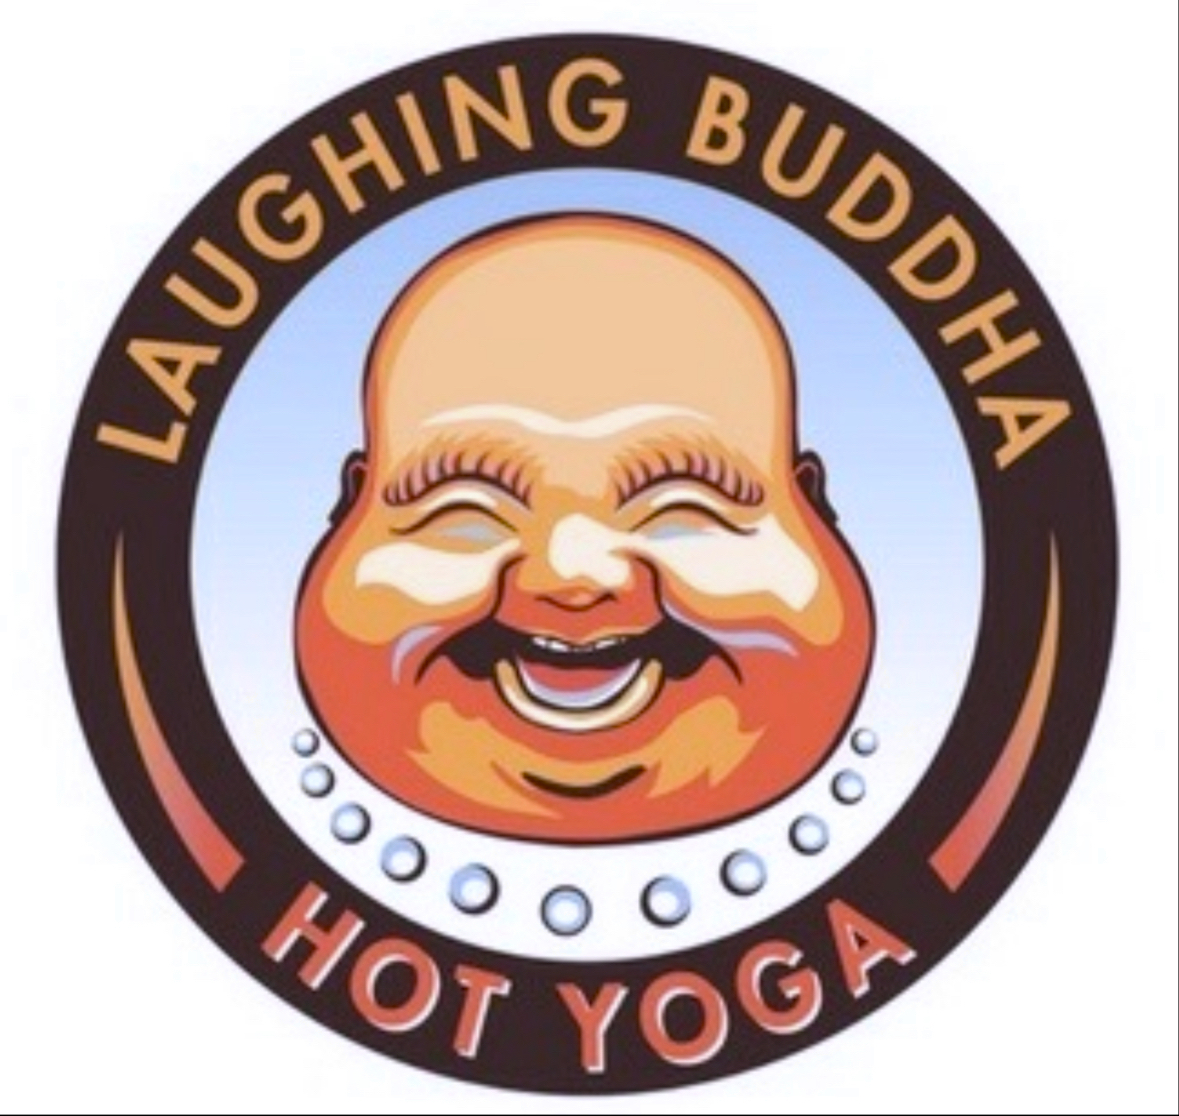 Laughing Buddha Hot Yoga - West Deptford 943 Kings Hwy, West Deptford New Jersey 08086